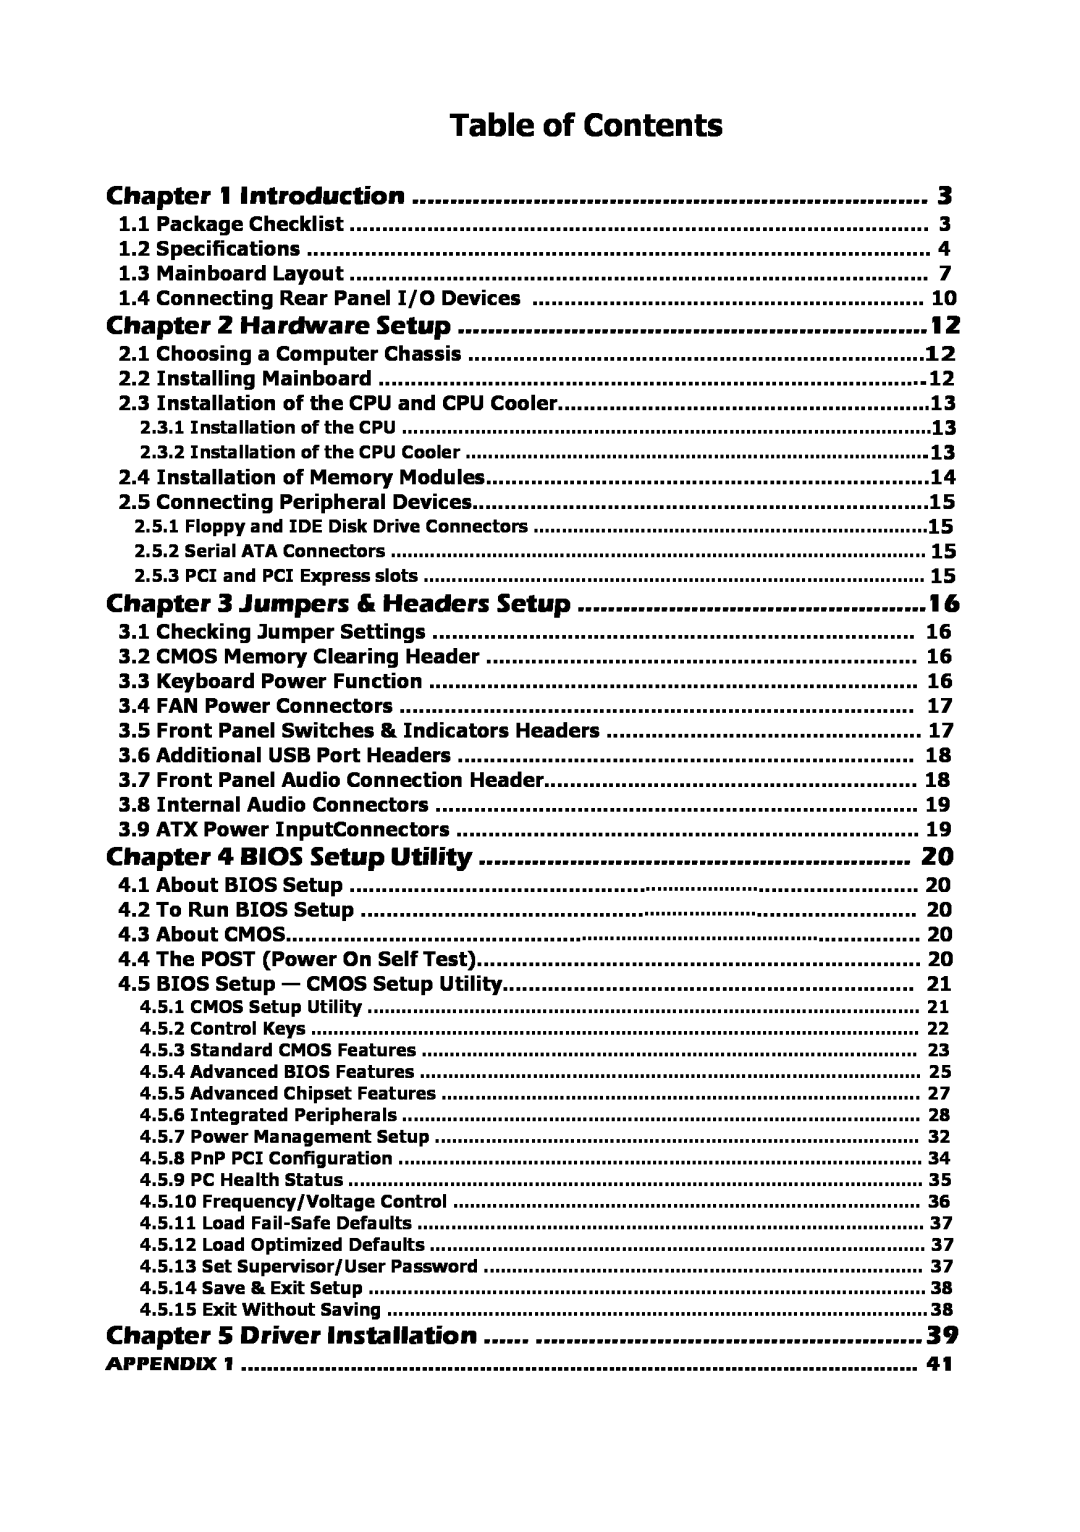 Intel Intel P35/P31 Socket LGA775 Processor Mainboard Table of Contents, Package Checklist, Specifications, About CMOS 